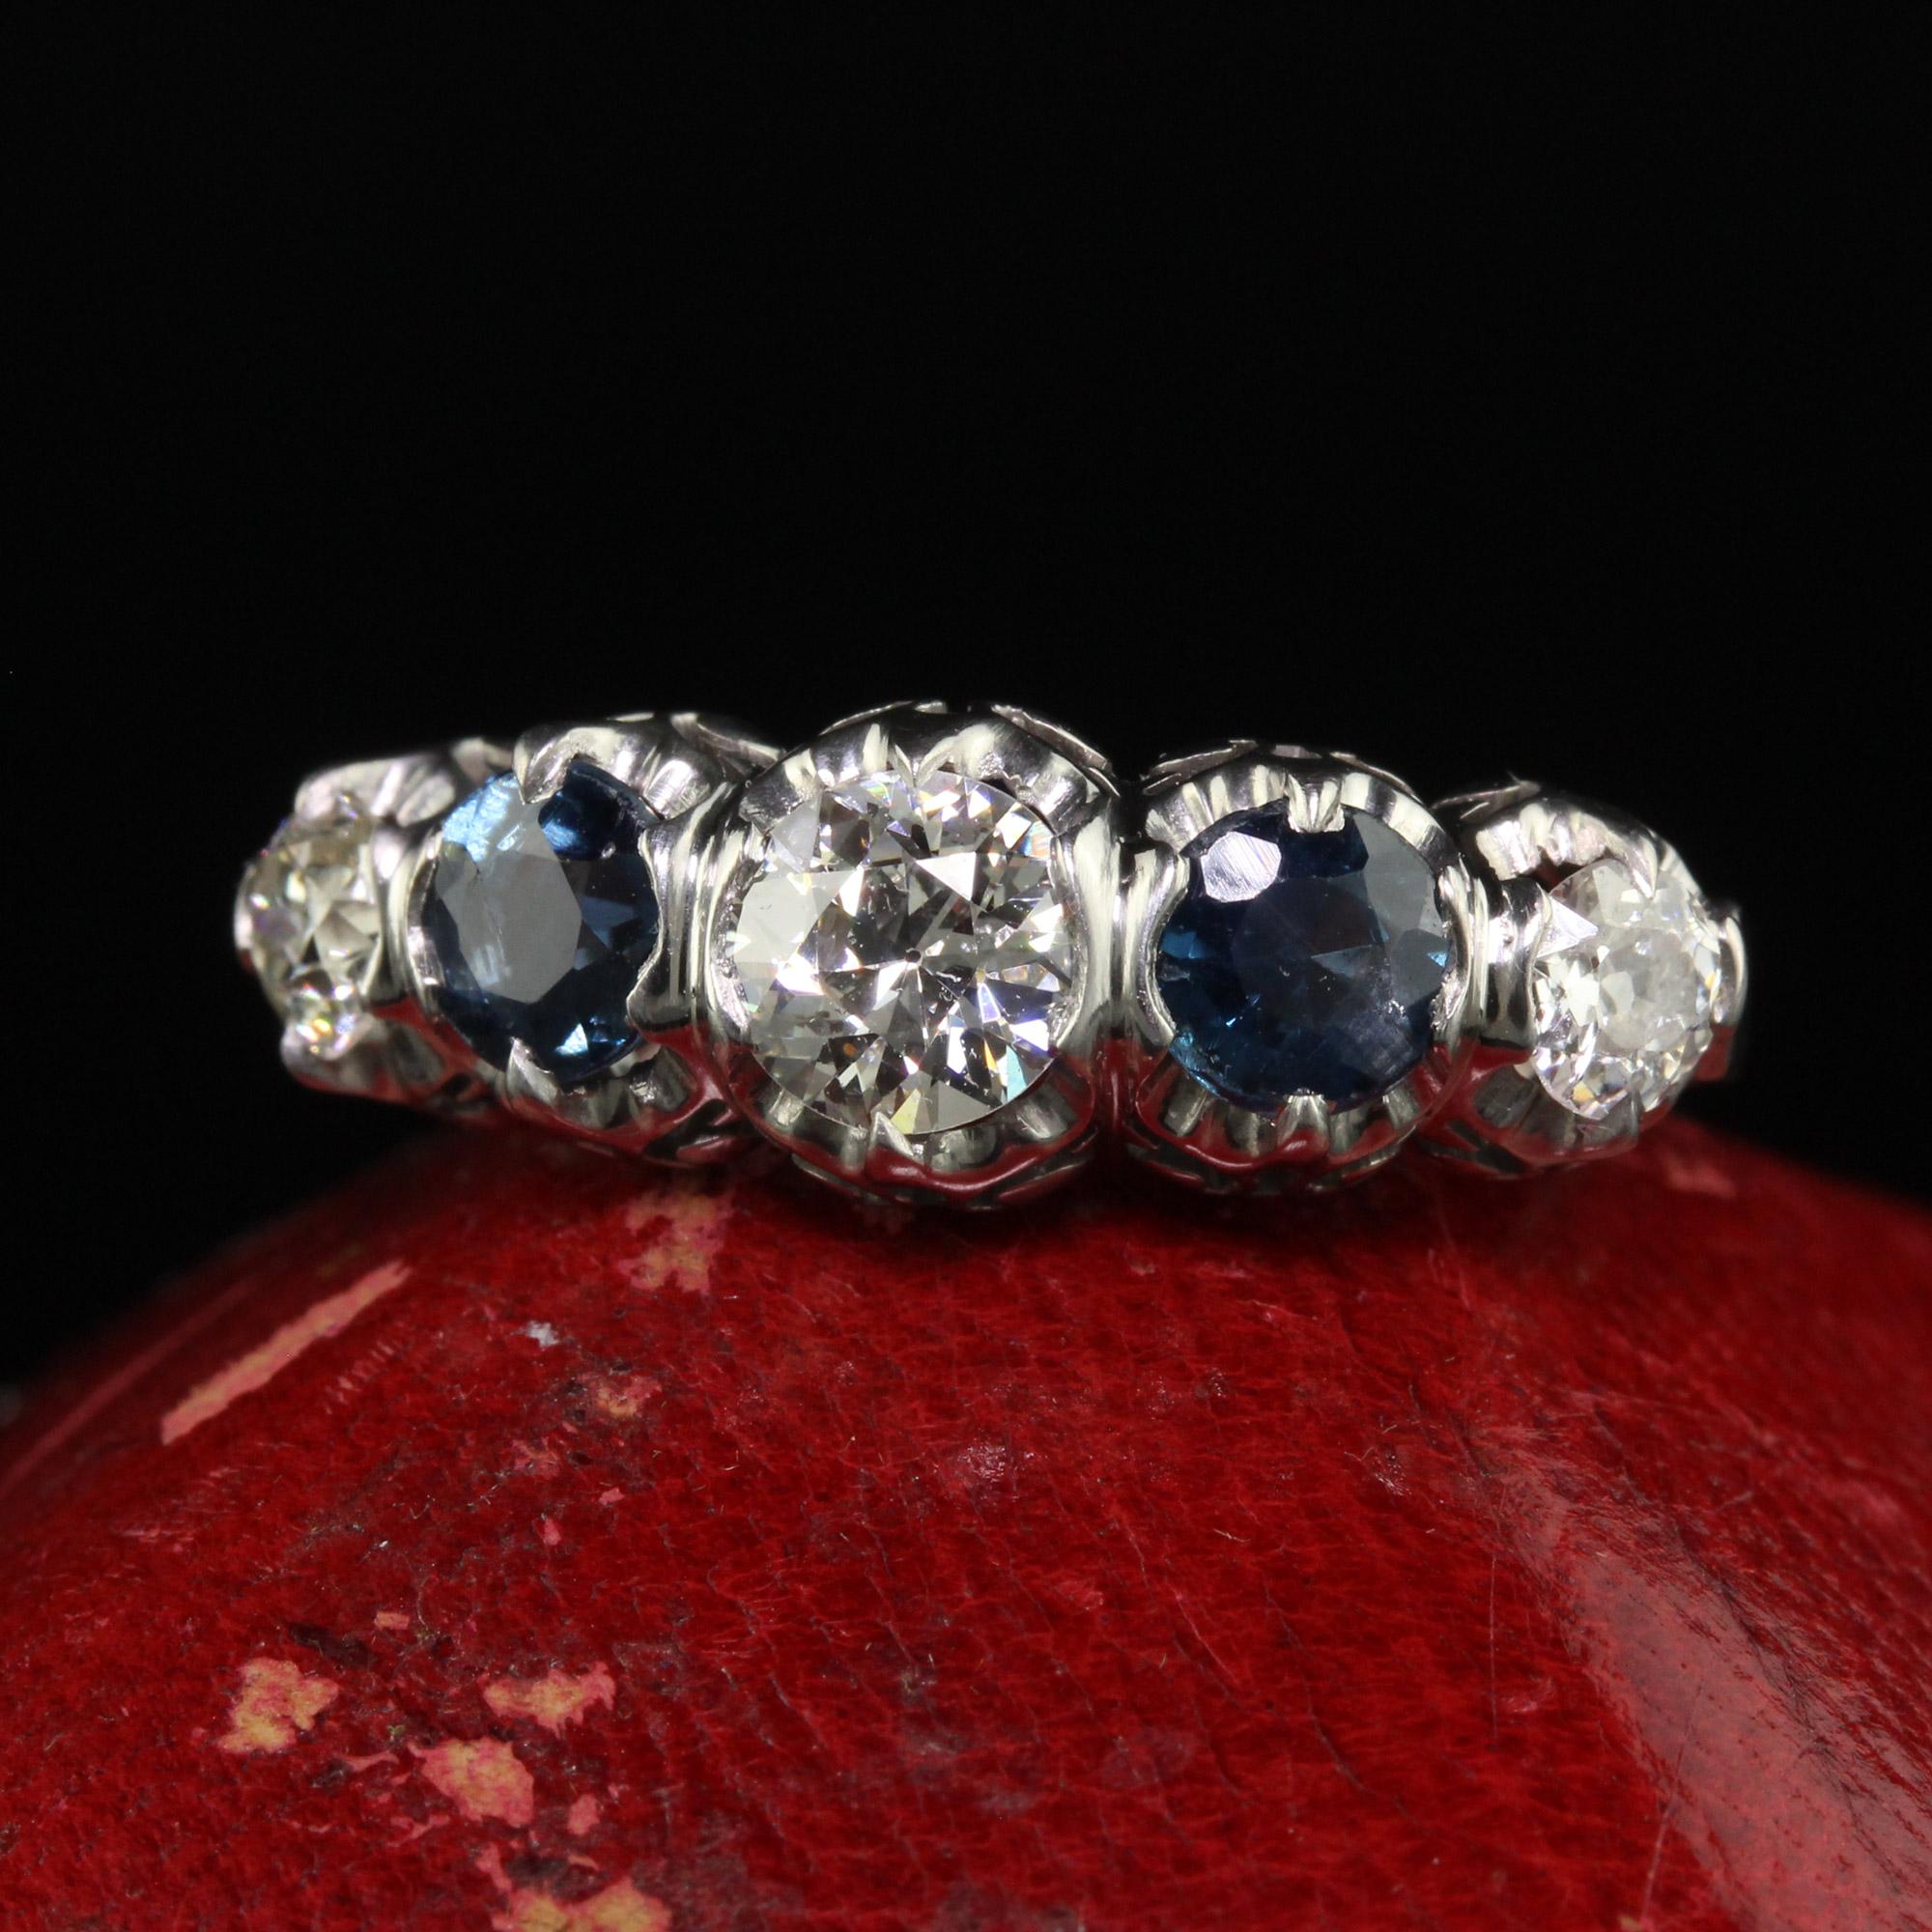 Beautiful Vintage Retro Platinum Old Euro Diamond and Sapphire Five Stone Ring - GIA. This classic Retro five stone ring is crafted in platinum. The center holds an old European cut diamond that has a GIA report. The center diamond has a natural